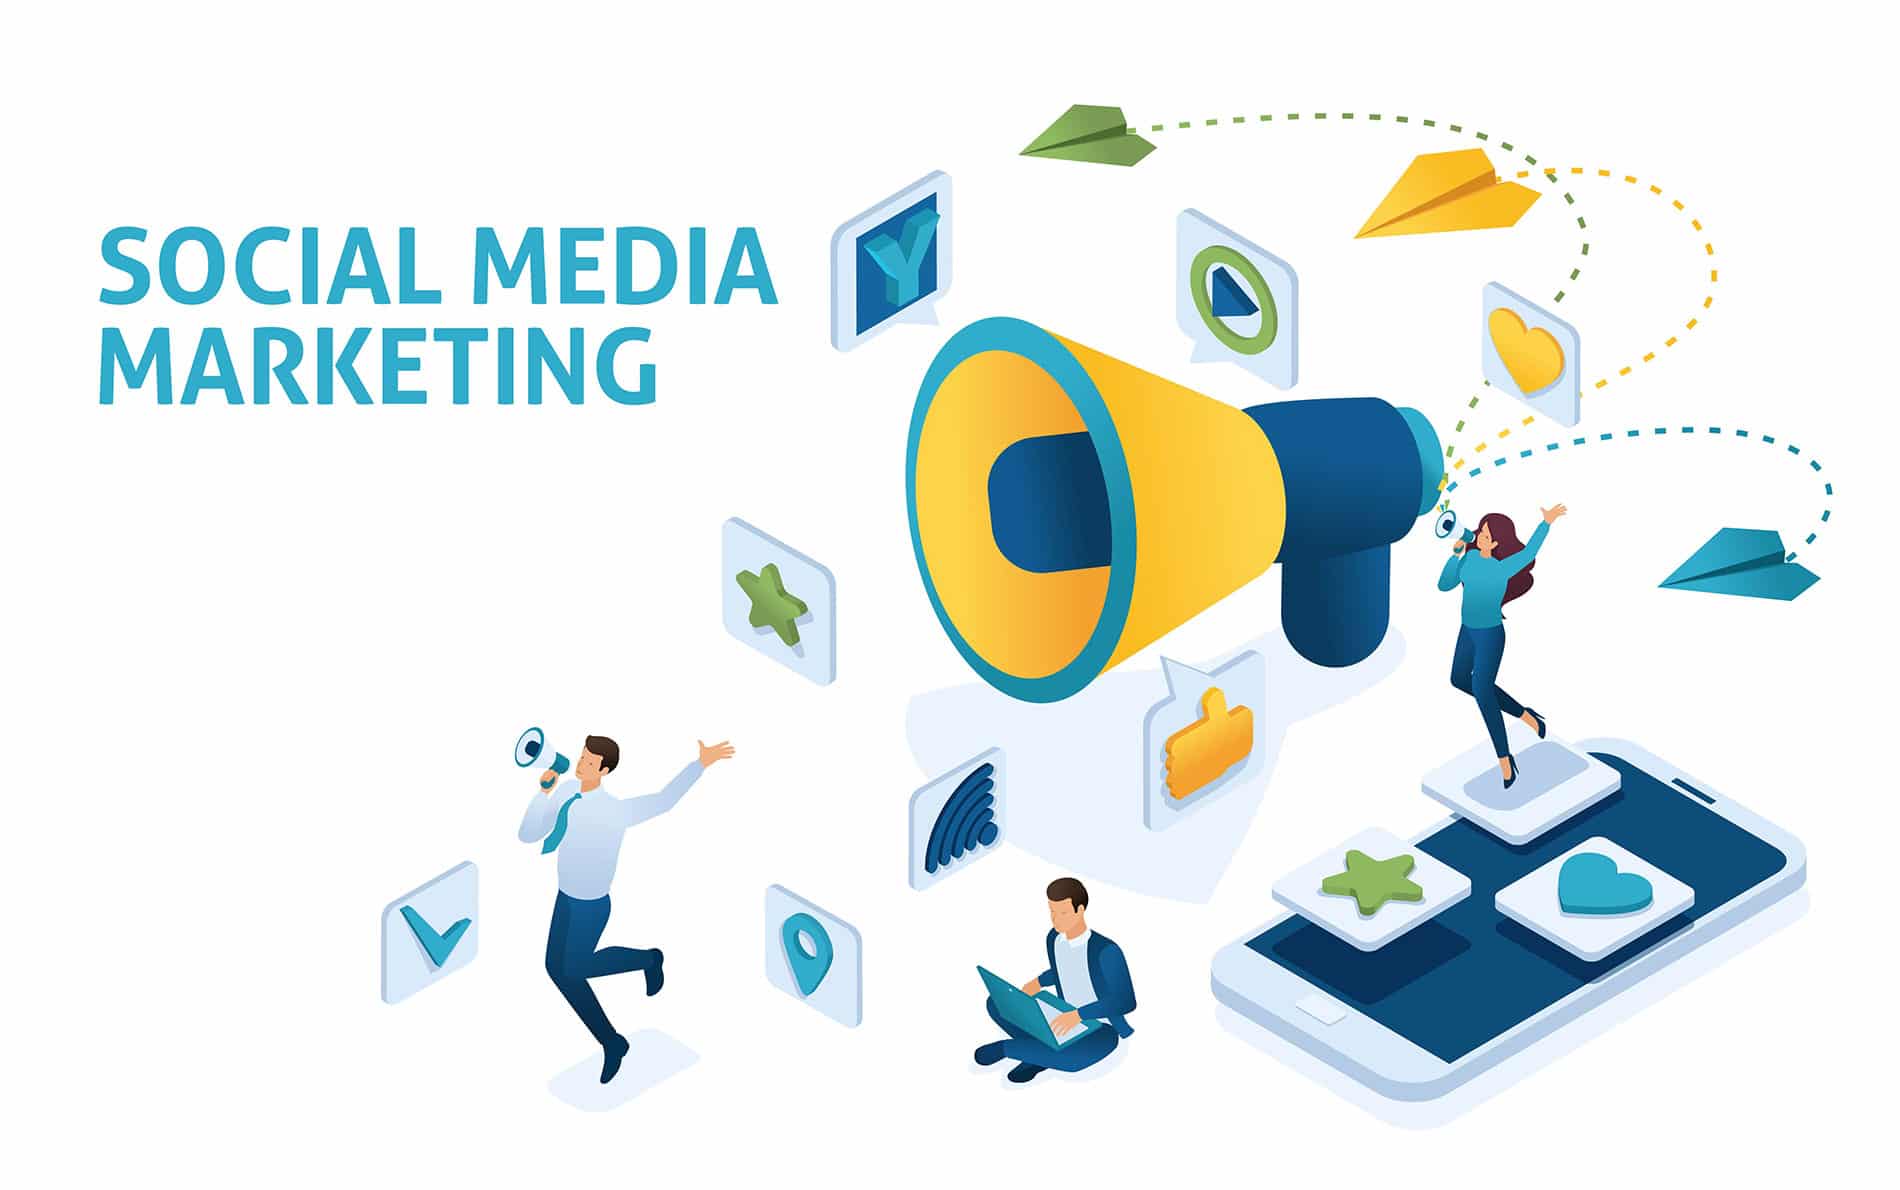 What are some of the typical services offered by a social media marketing company